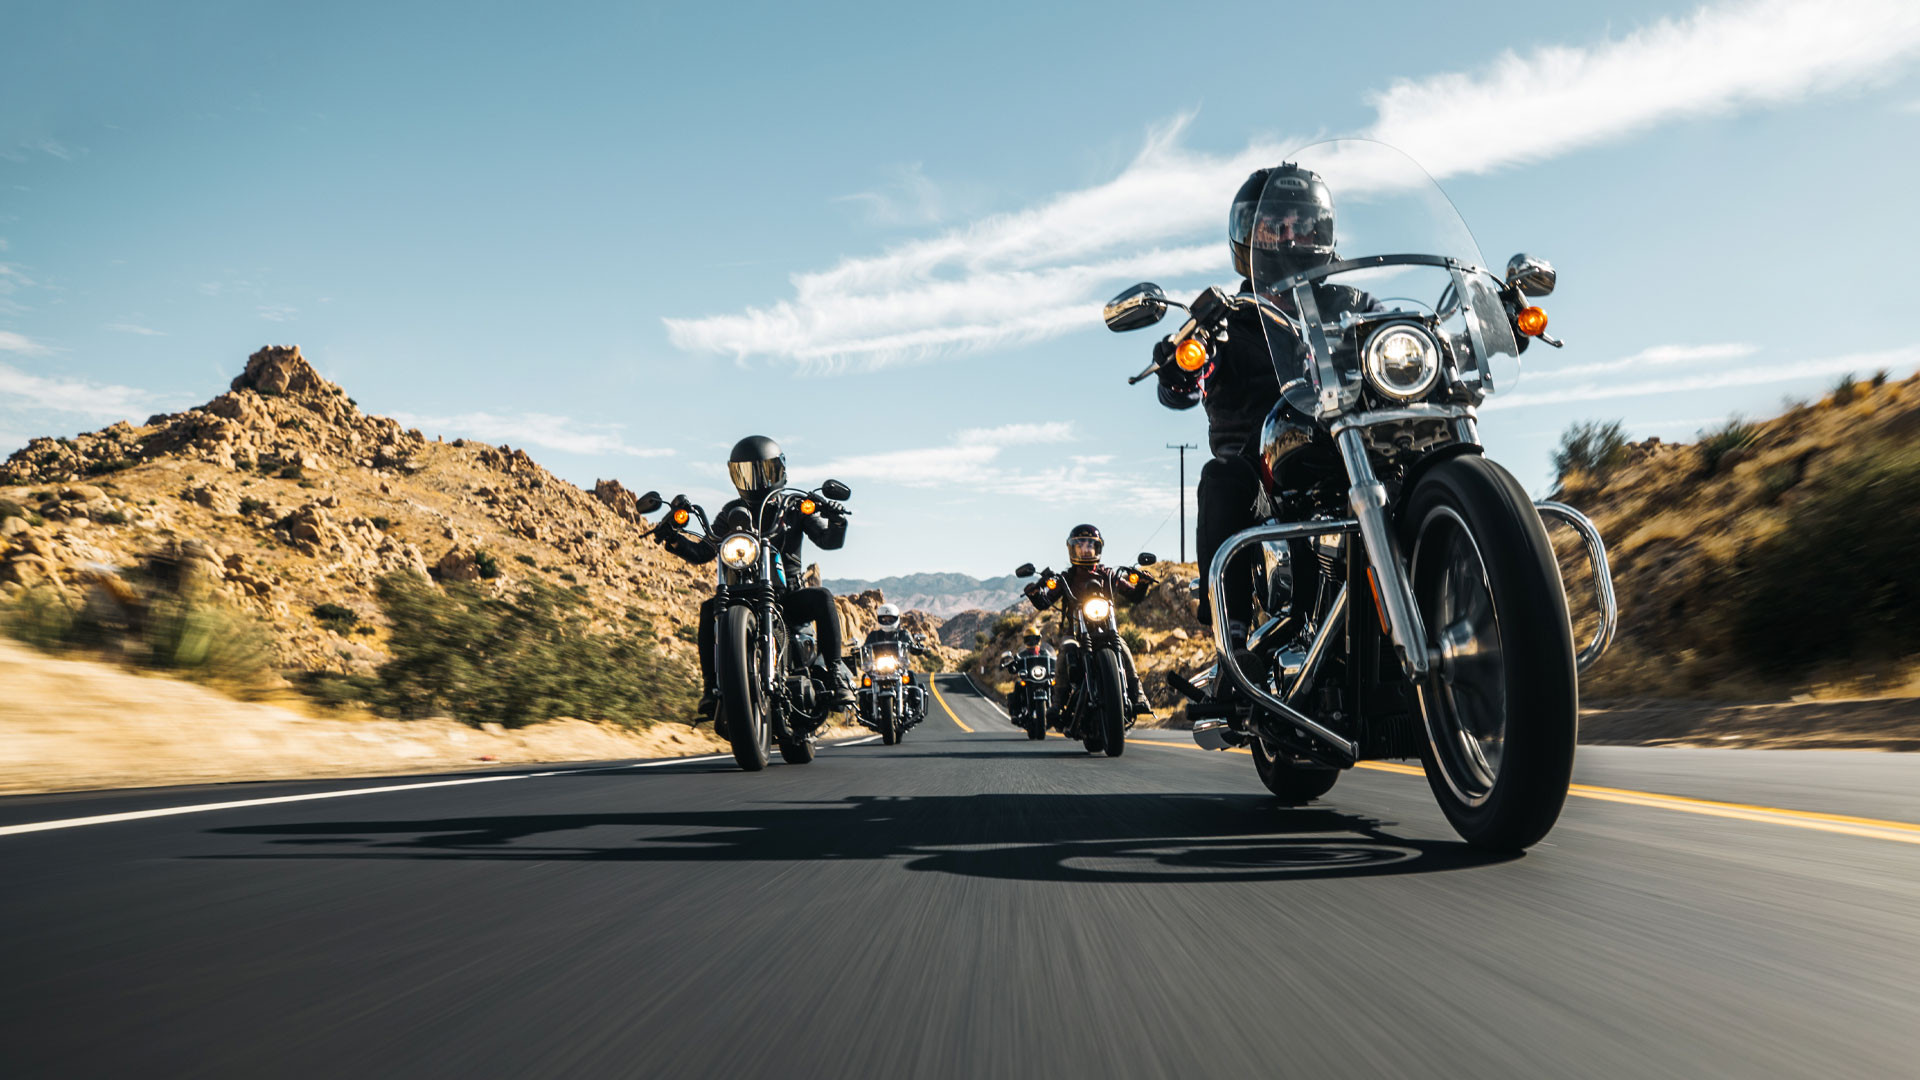 H-D1 Marketplace is now accepting listings from private parties wanting to sell their motorcycles. Photo courtesy Harley-Davidson.